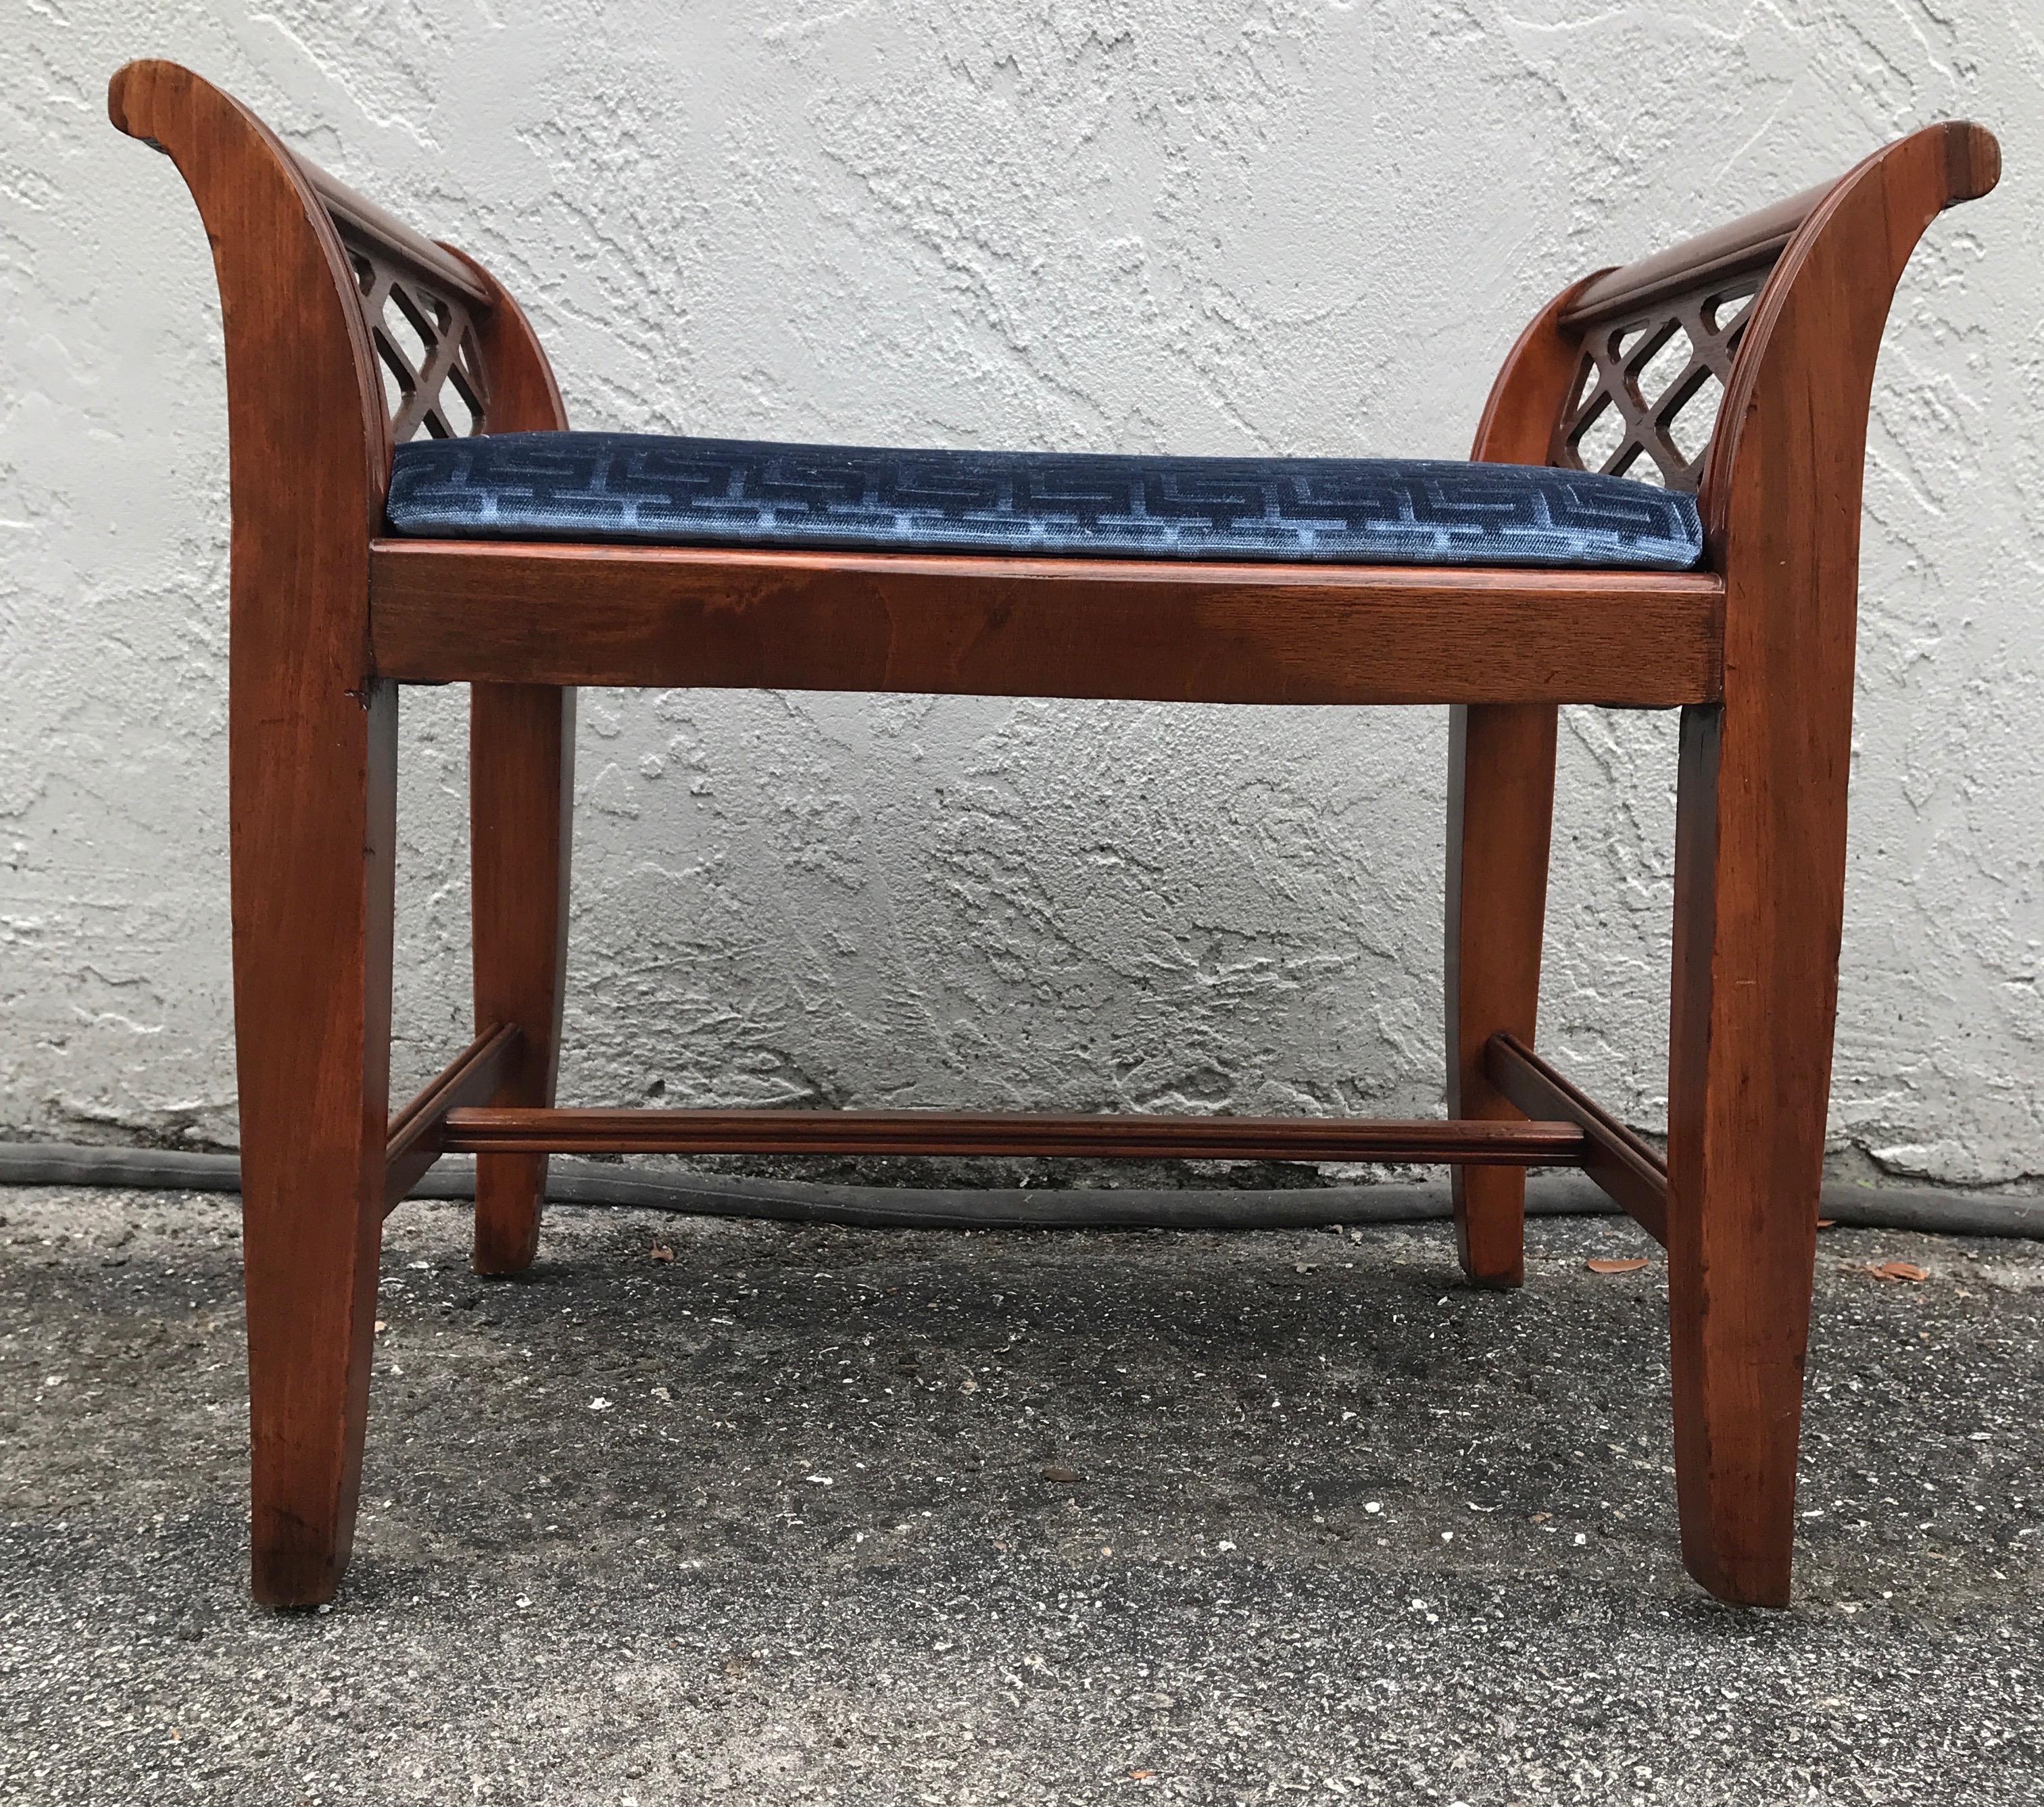 Sweet Chinese Chippendale style bench upholstered in blue velvet with Greek key design.